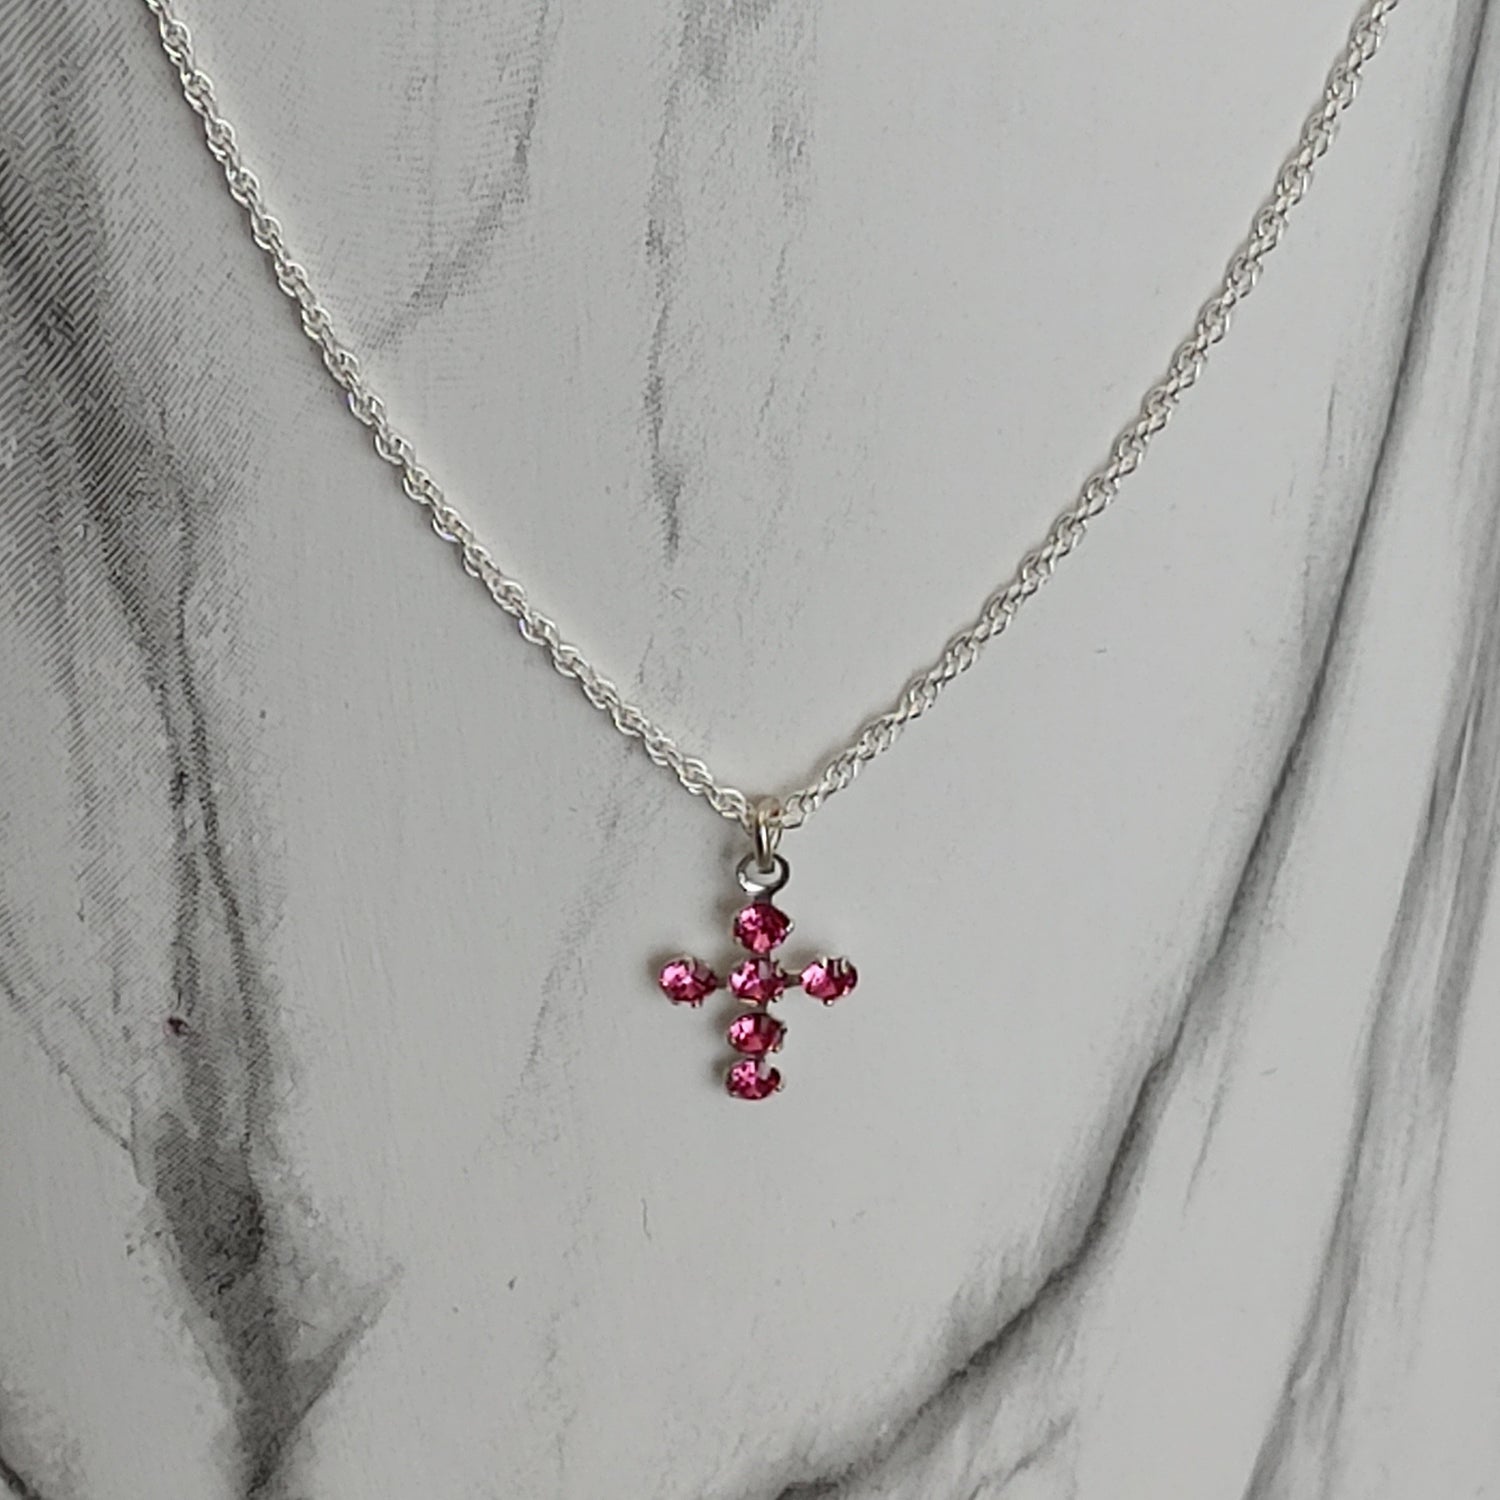 Pretty Crystal Pink Cross Necklace - Crystal Flower